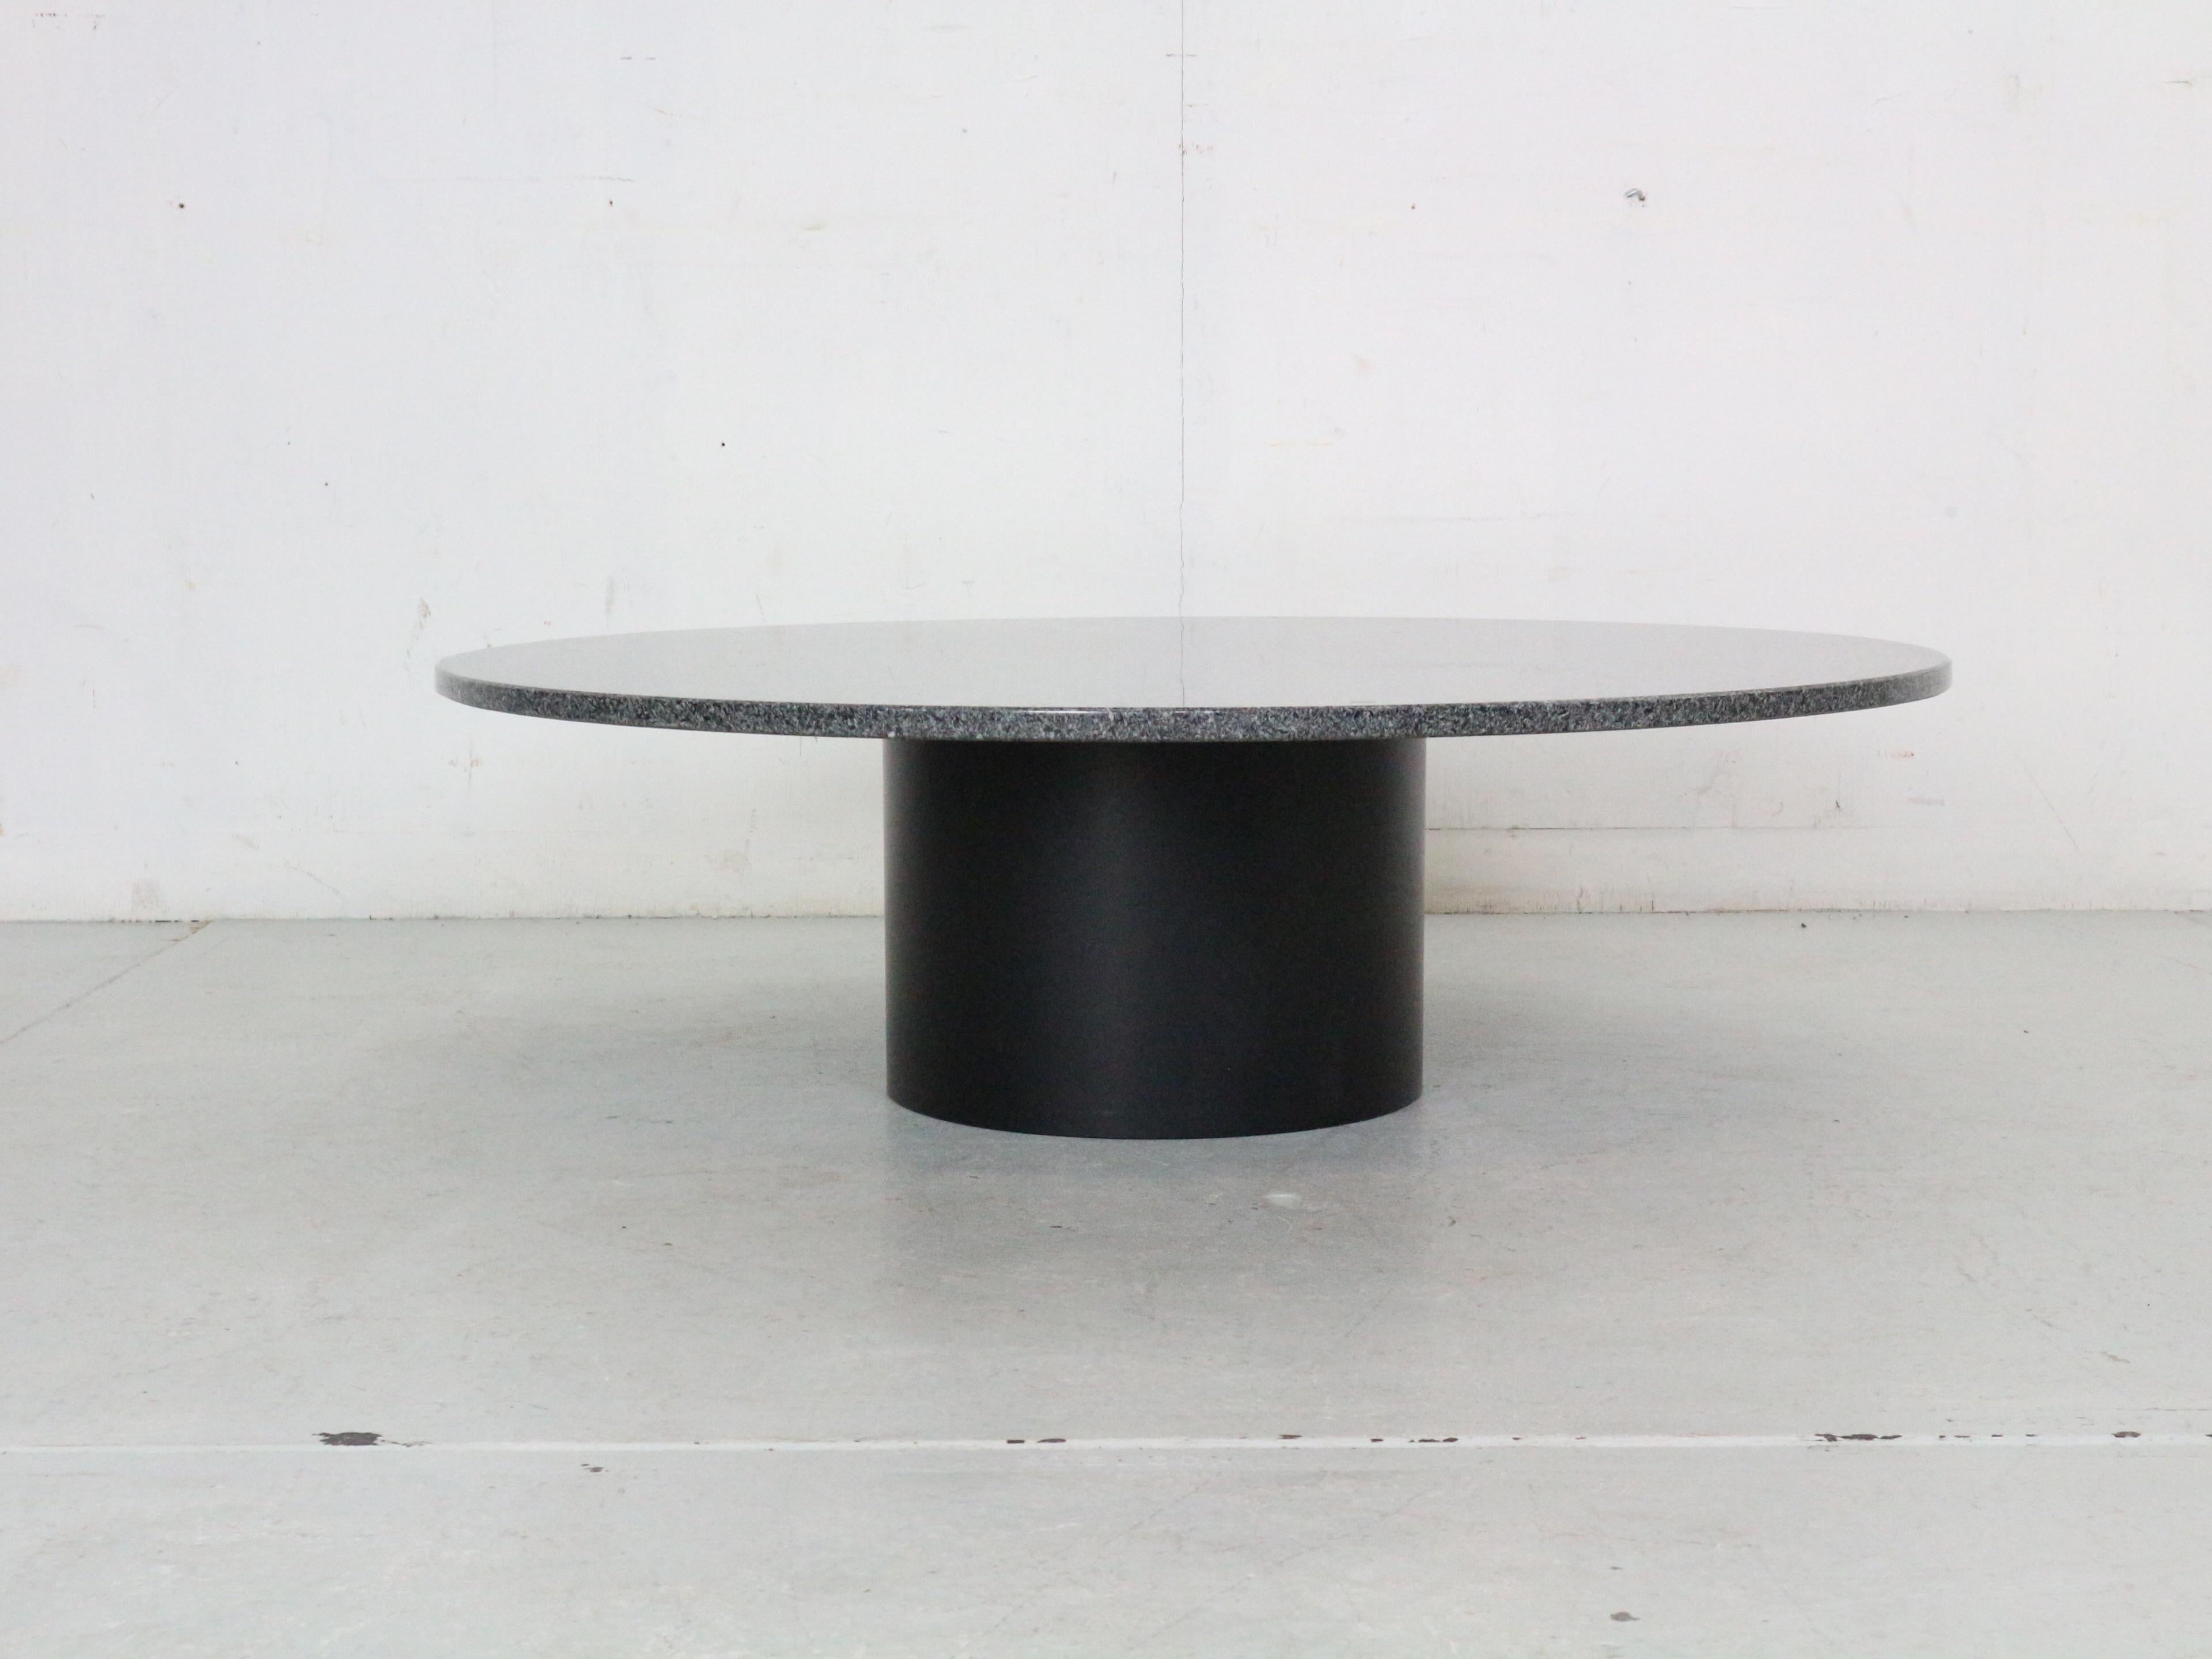 Mid- Century modern period coffee table manufactured around 1970's Italy.
The table top is made of grey/black granite stone and standing on a black solid steel round tube base.

Table is in great condition.
